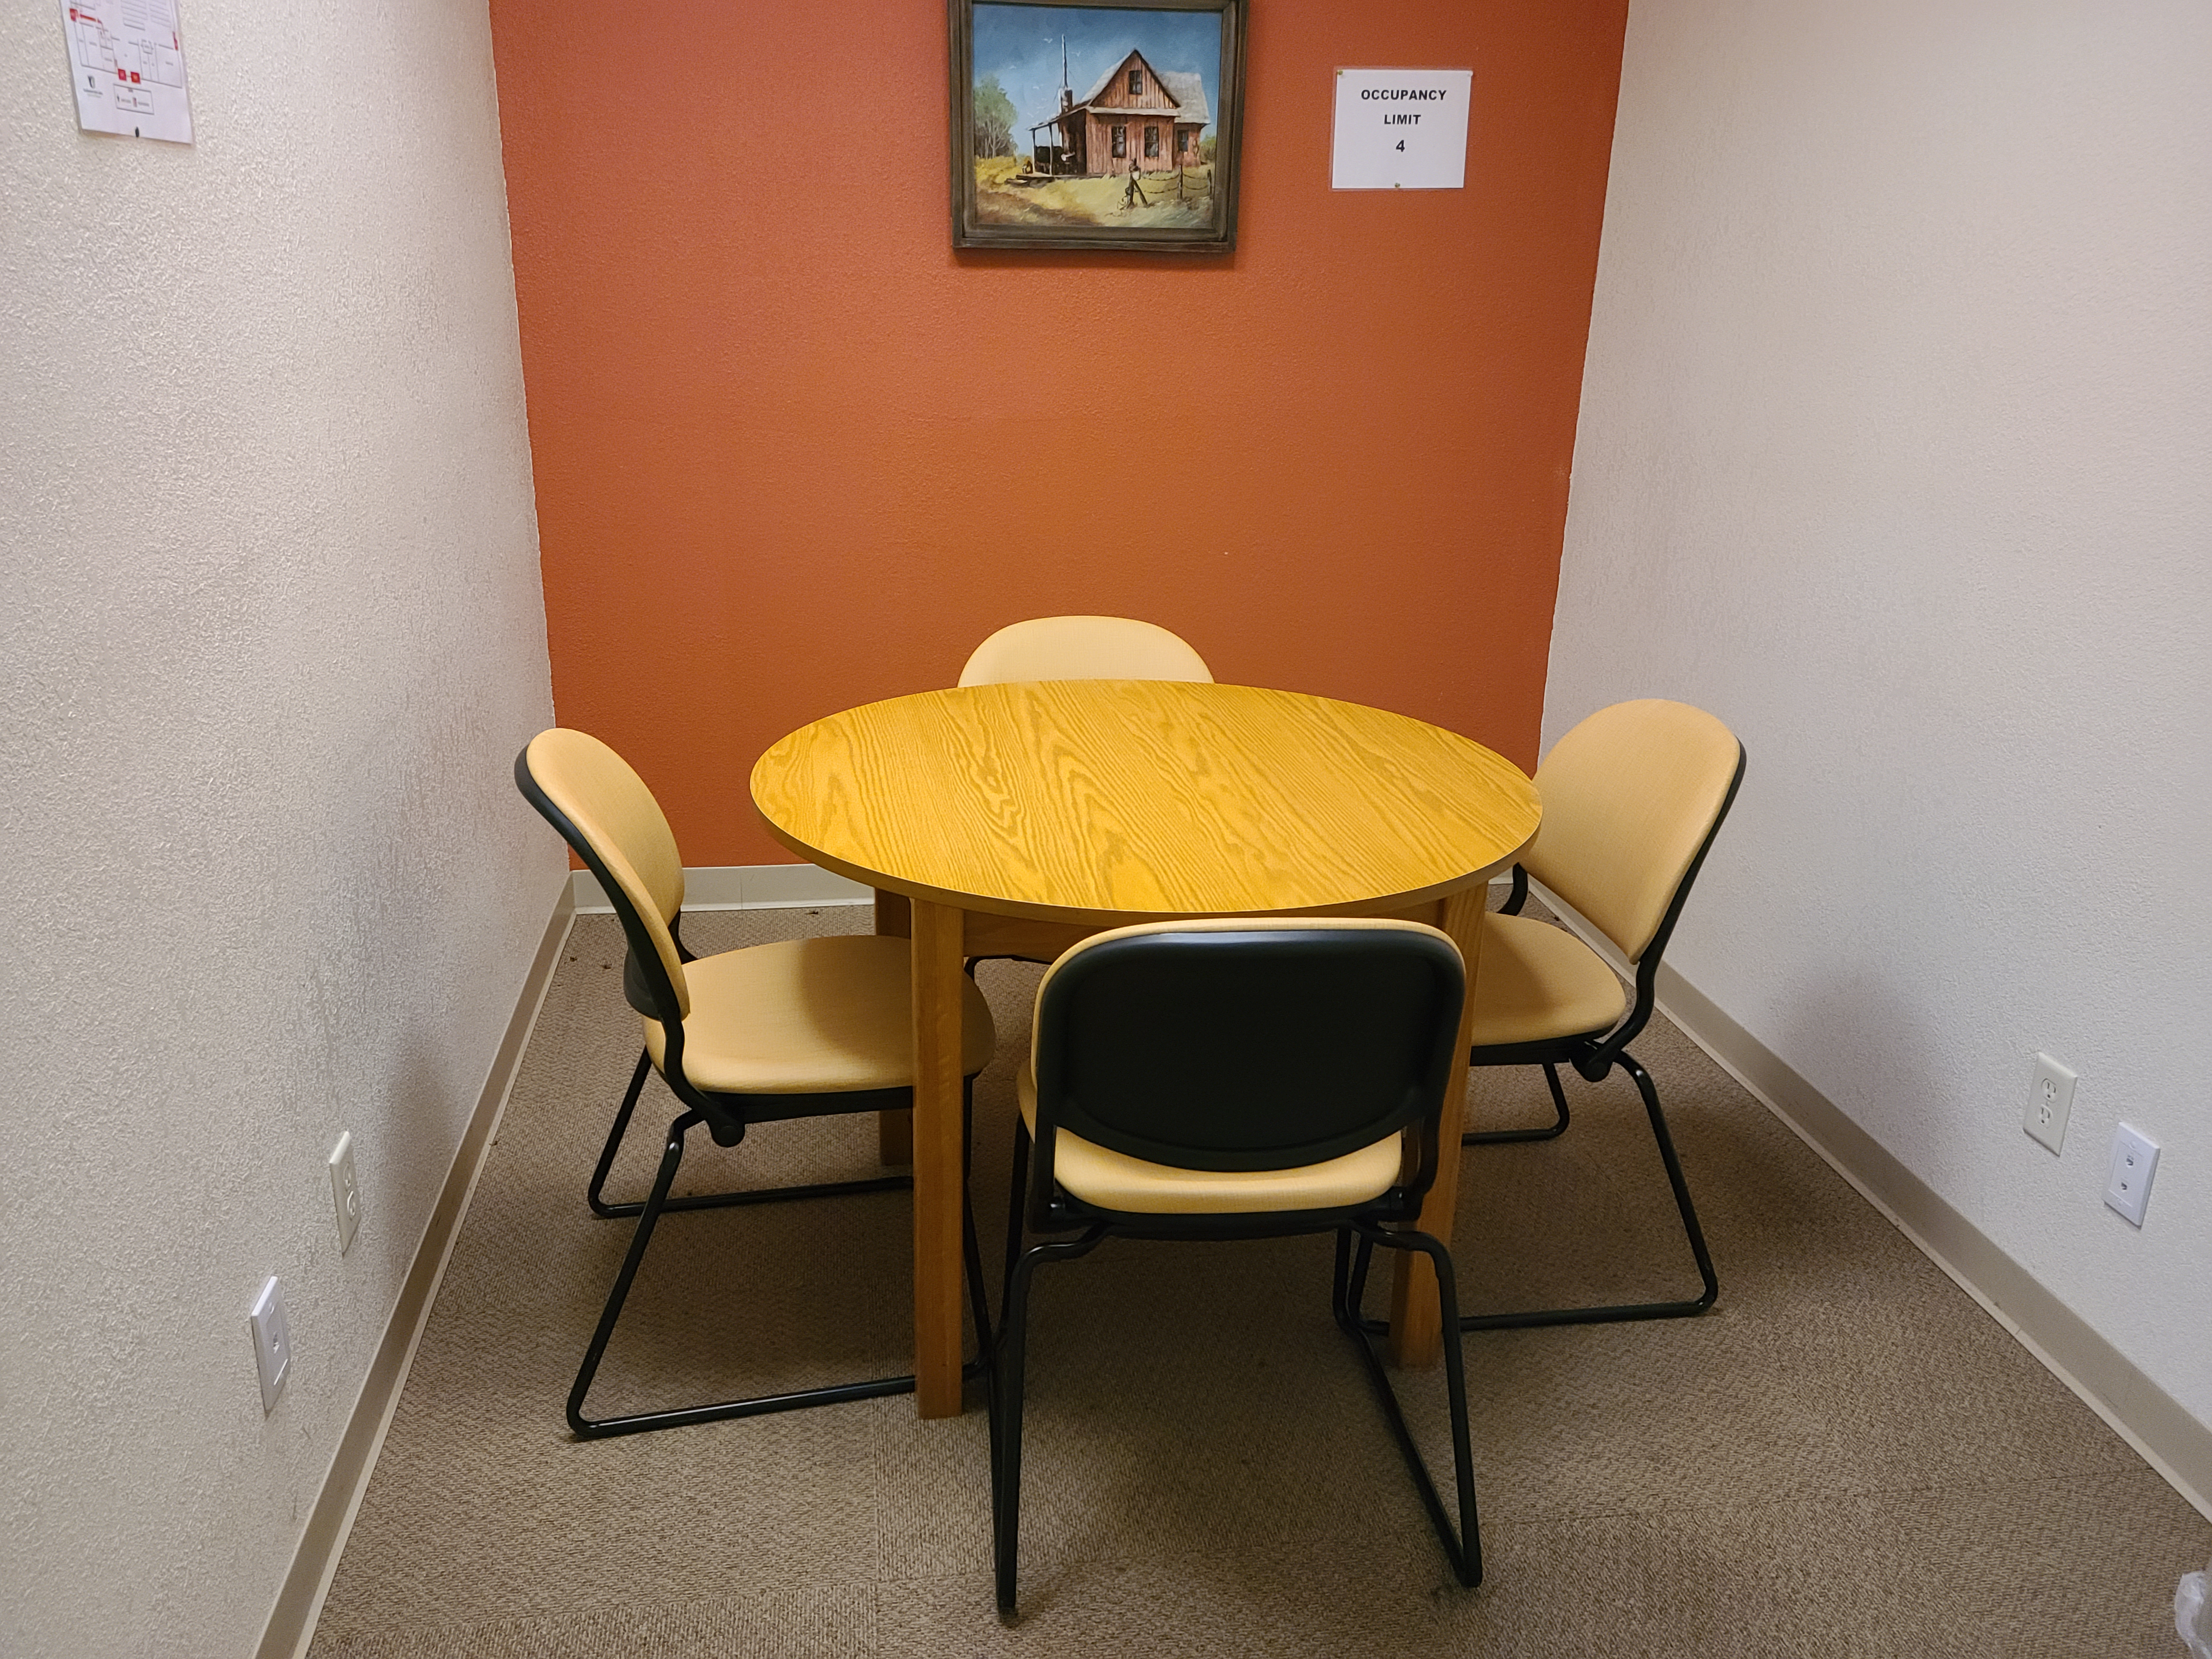 Round table surrounded by four chairs in a small room